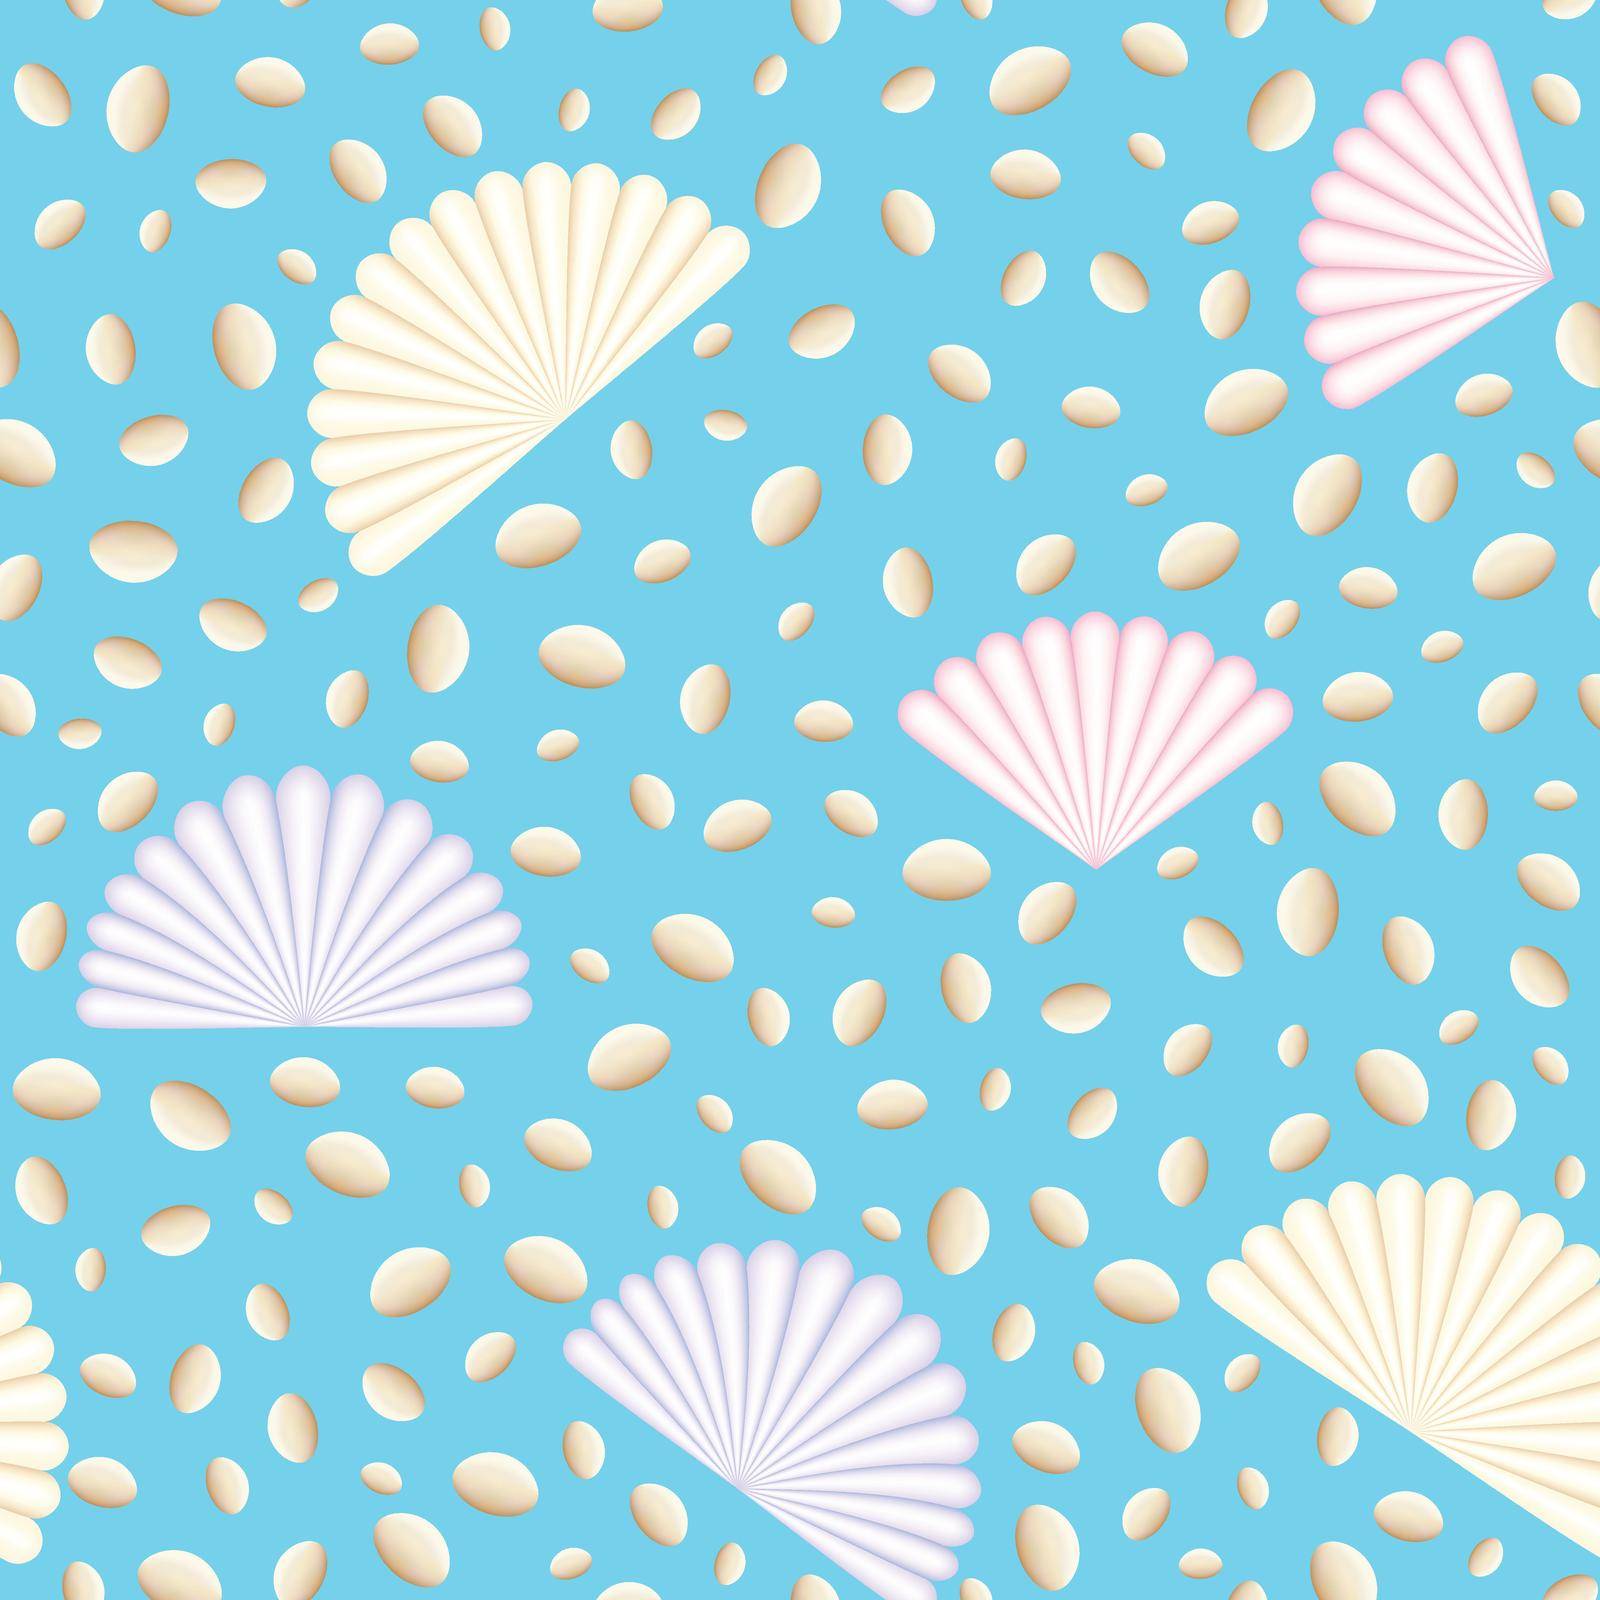 Sea shell seamless pattern. Pebbles on blue background.